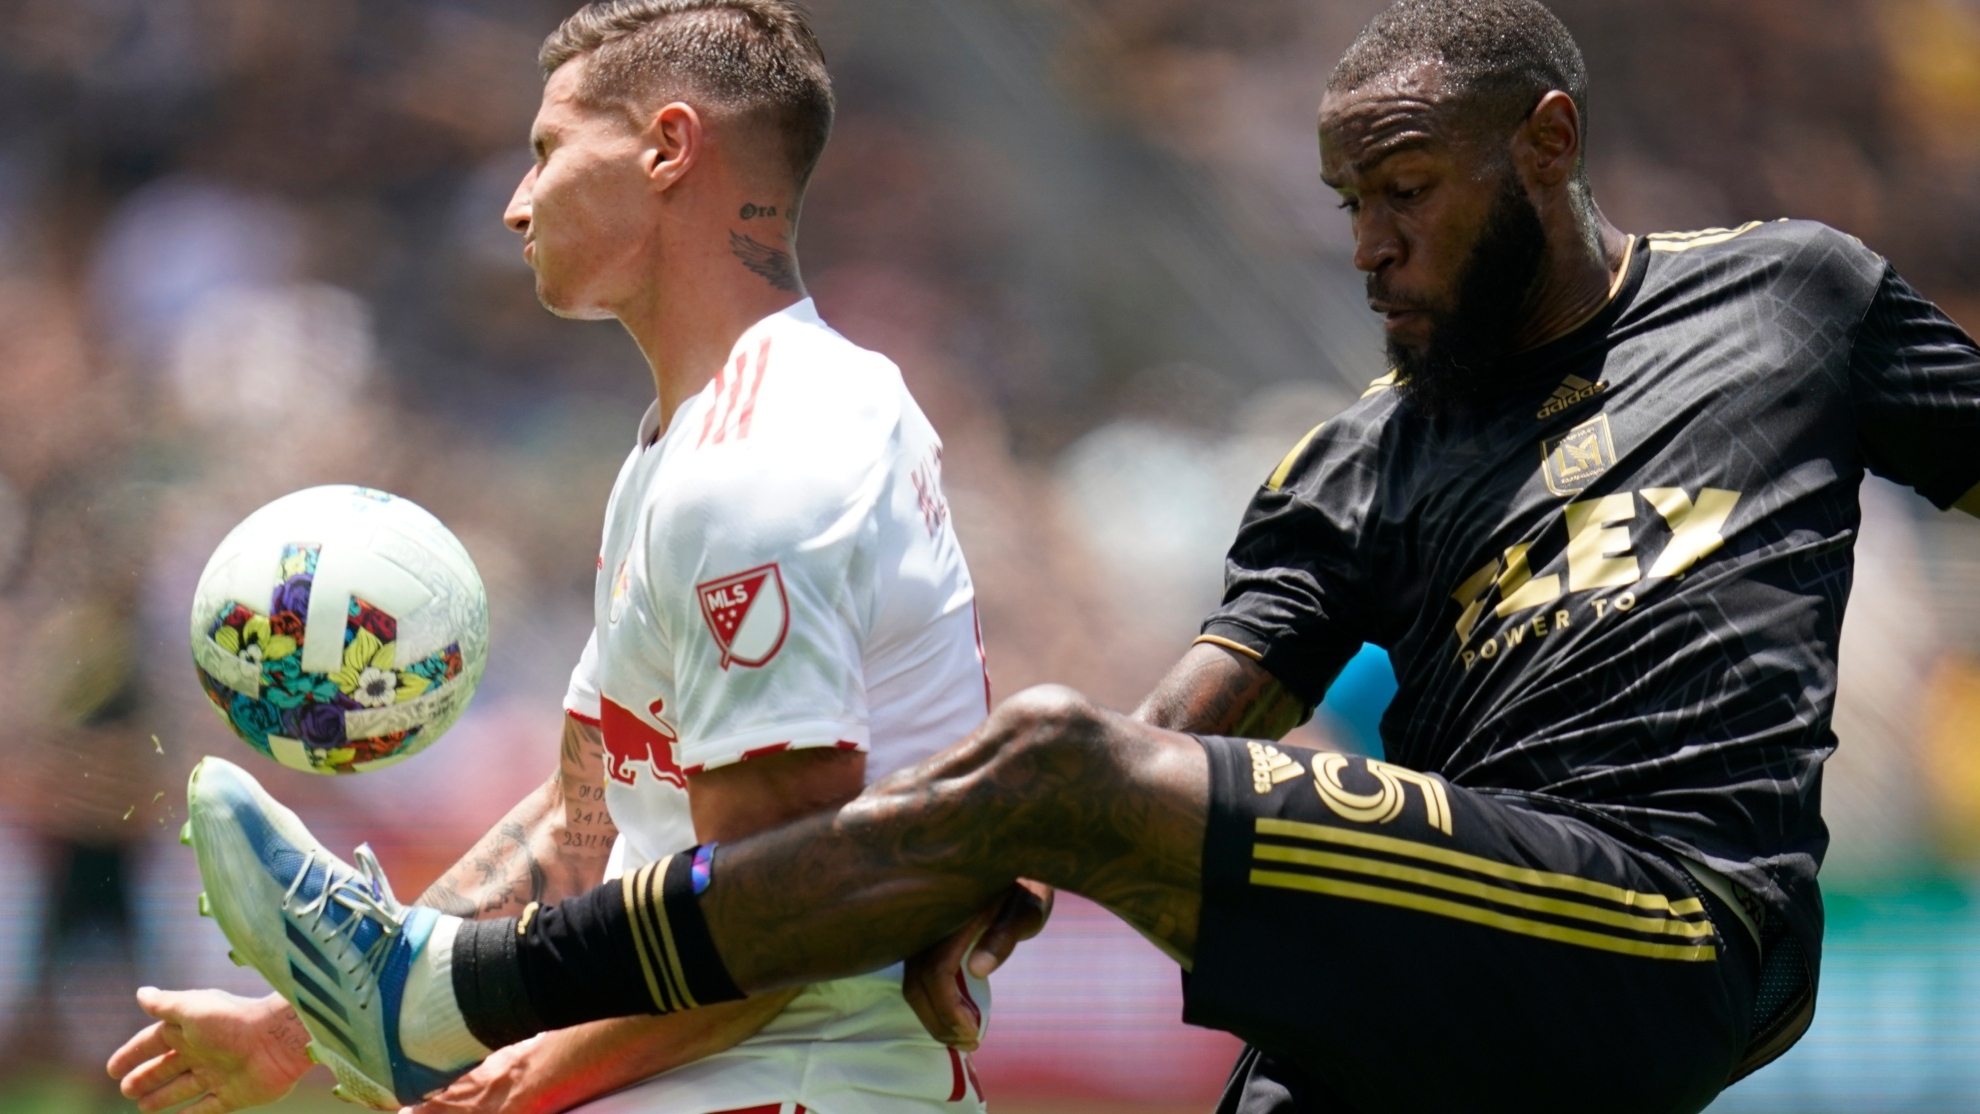 LAFC proves why theyre on top of the MLS with victory over NYRB